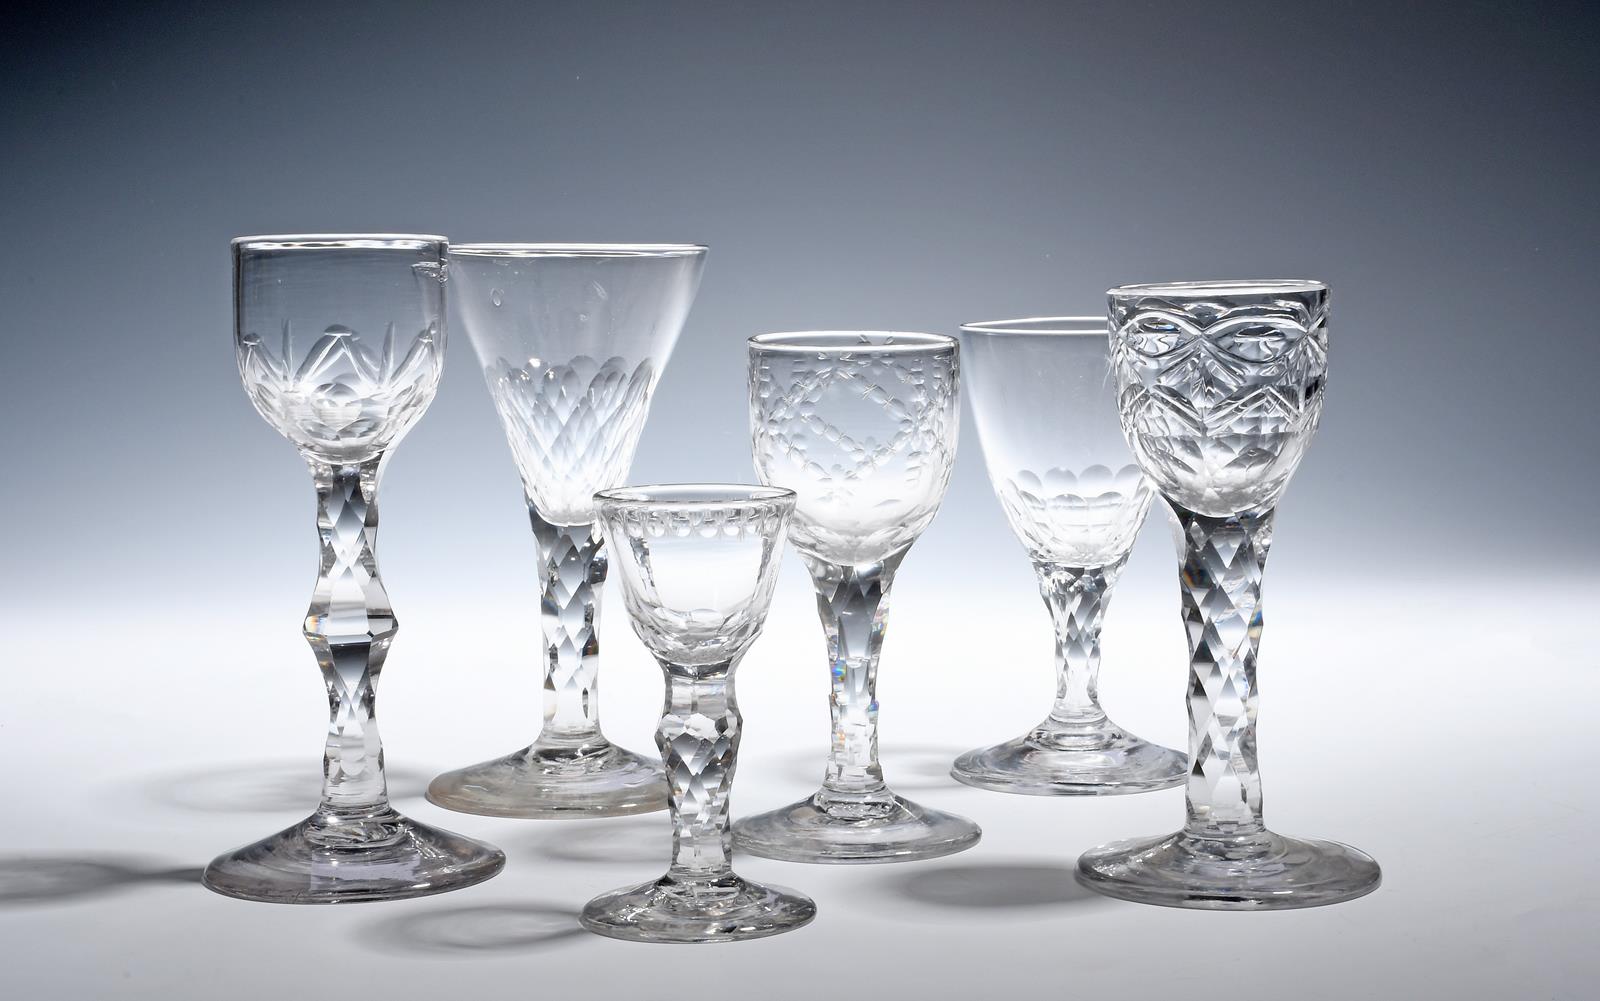 Six wine glasses c.1760-90, the bowls cut with varying designs, facets and polished ovals, raised on